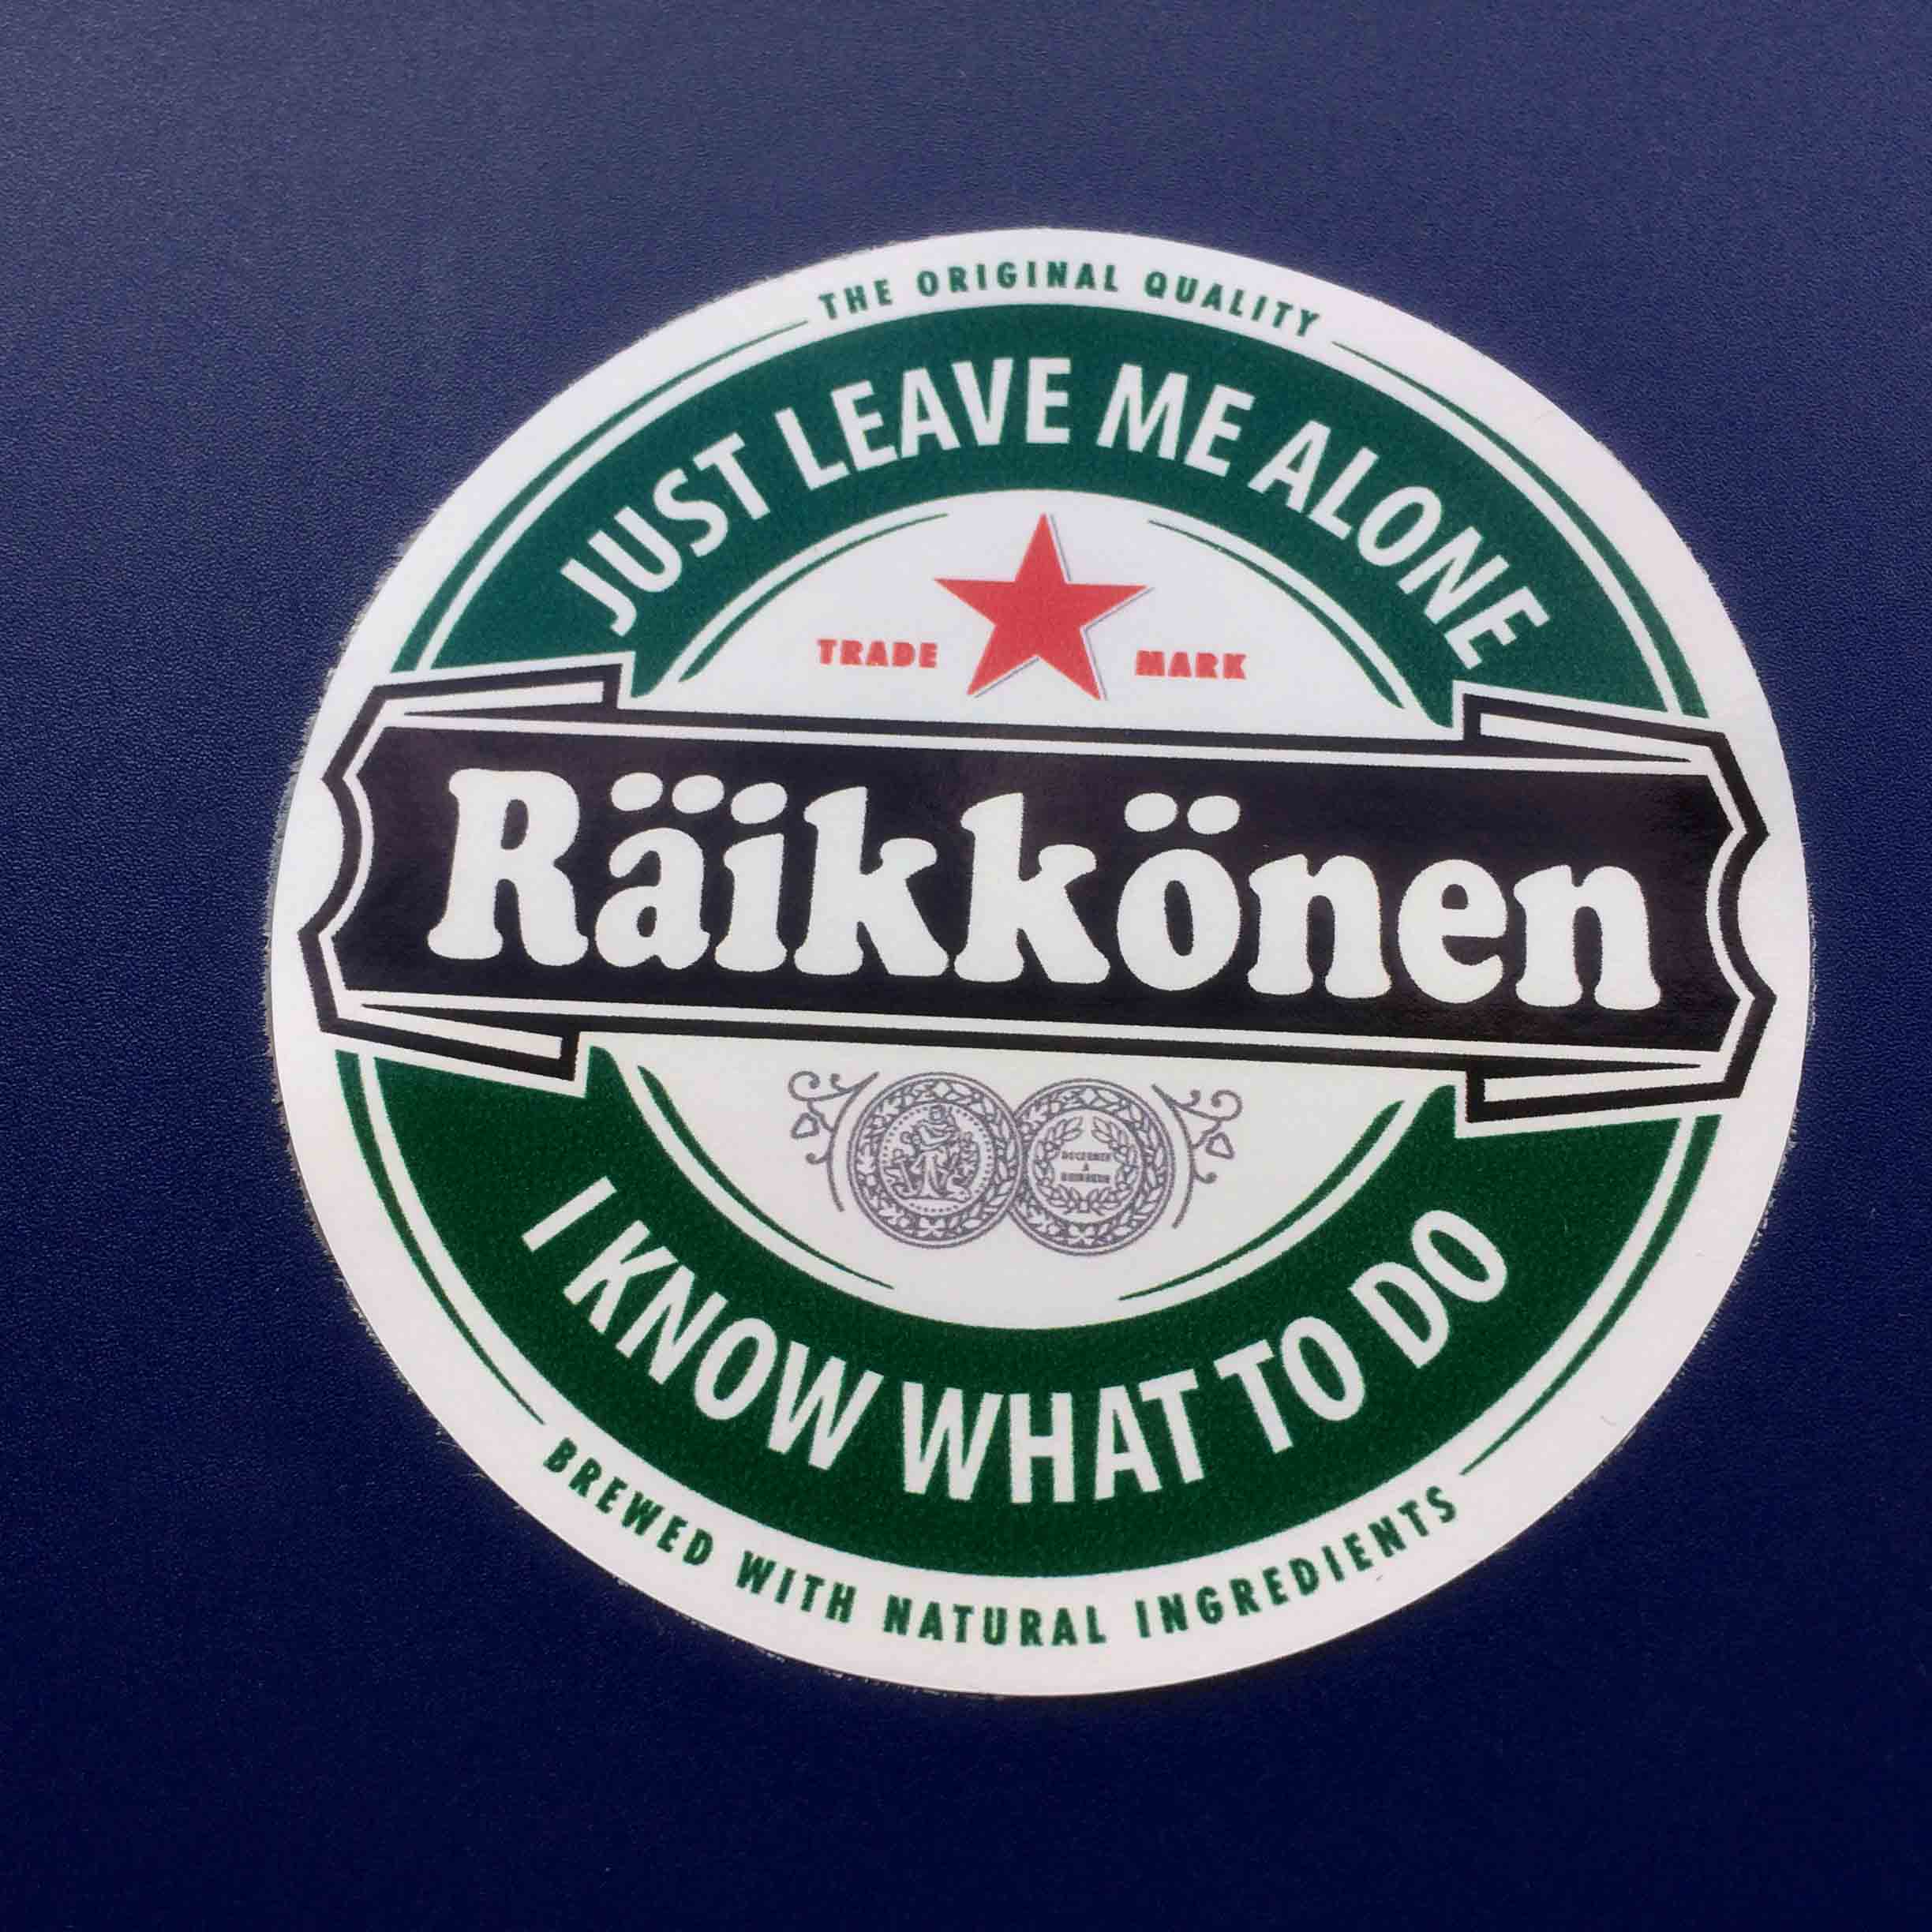 KIMMI RAIKKONEN F1 STICKERS. Imitating the Heineken logo. A green circular sticker with a red star. Raikkonen Just Leave Me Alone I Know What To Do. The Original Quality Brewed With Natural Ingredients.